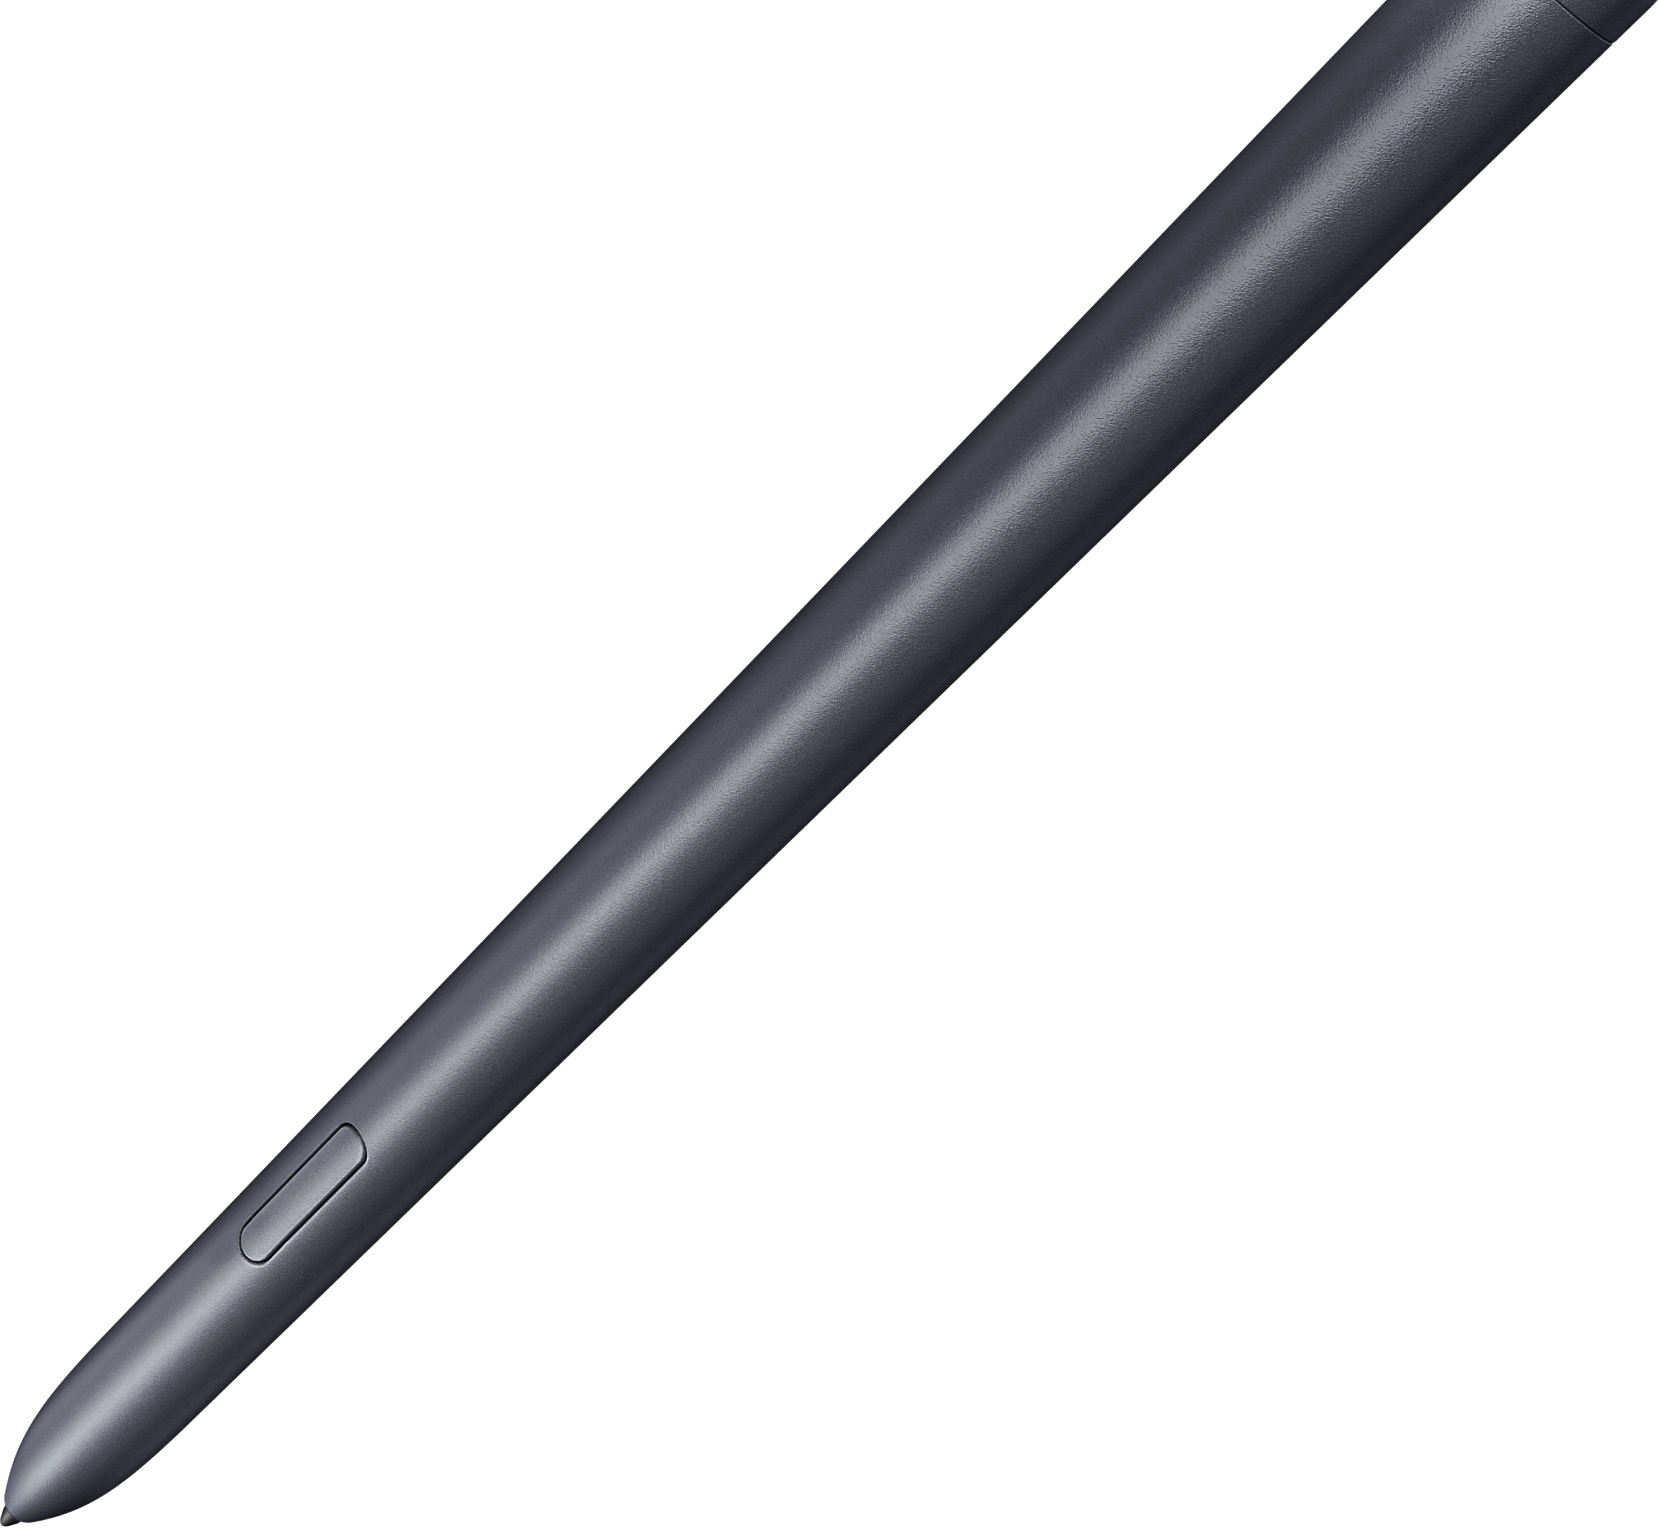 Close-up of S Pen from the side